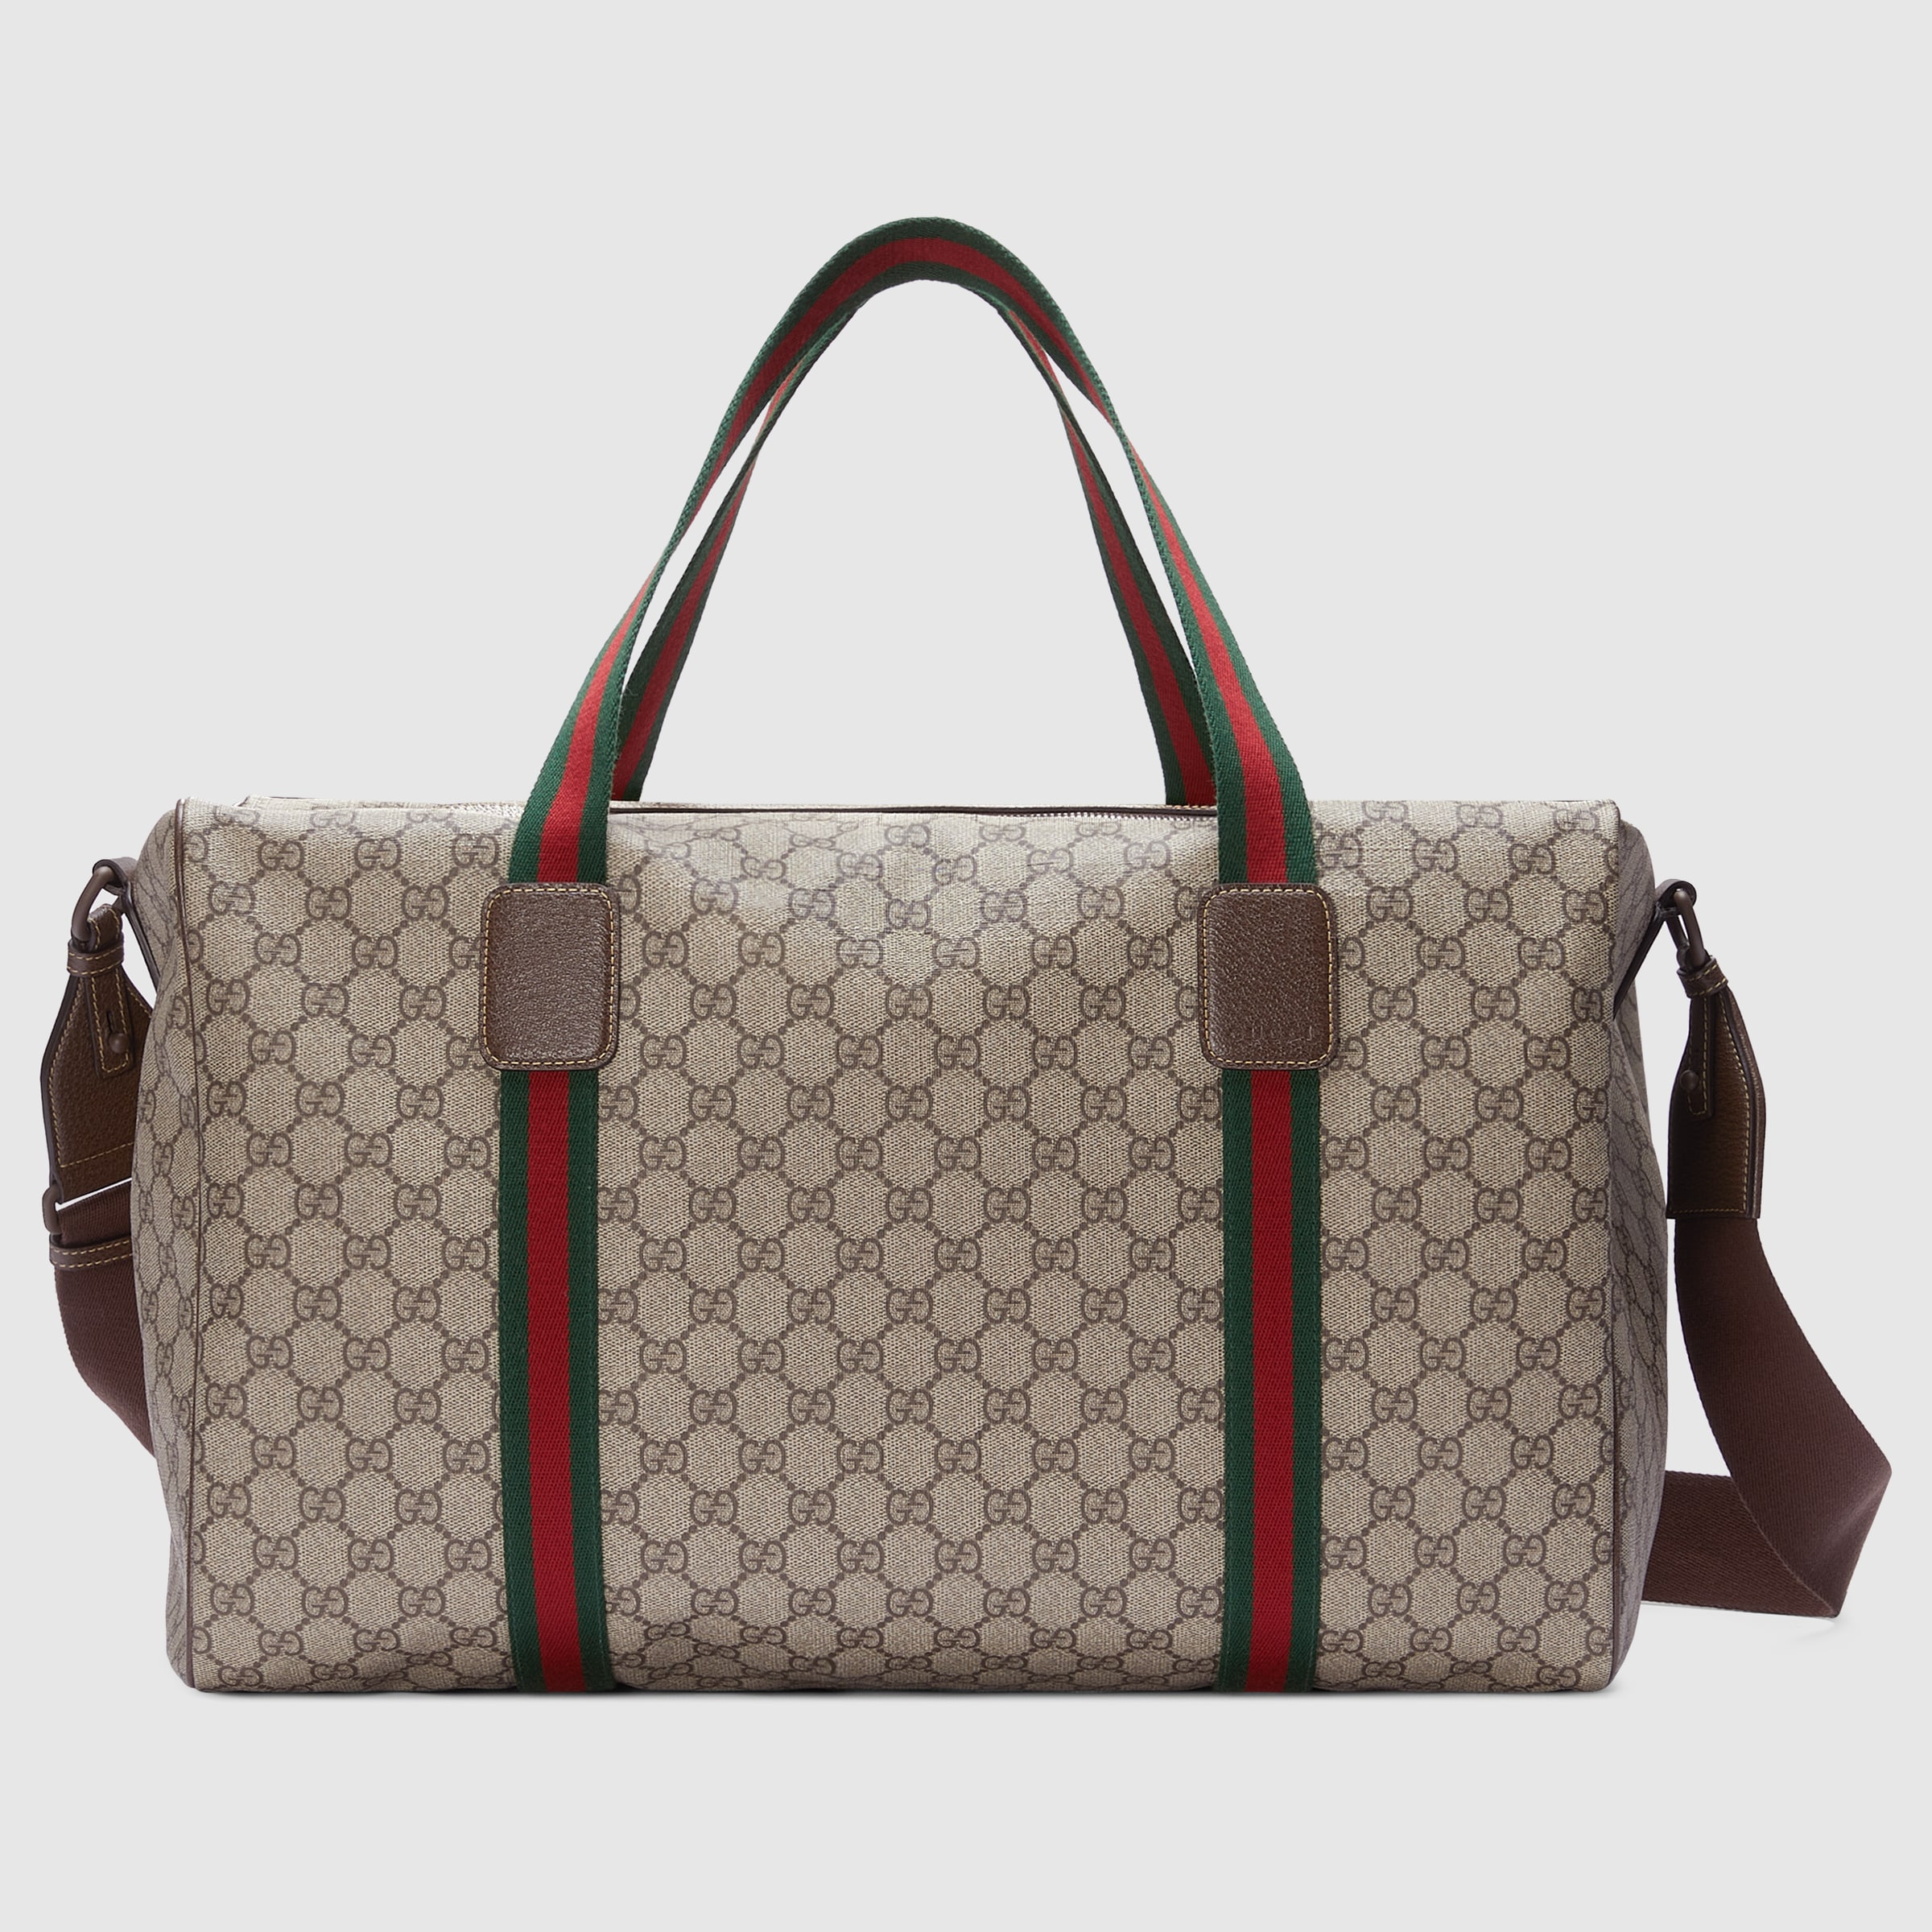 Gucci large duffle bag with web